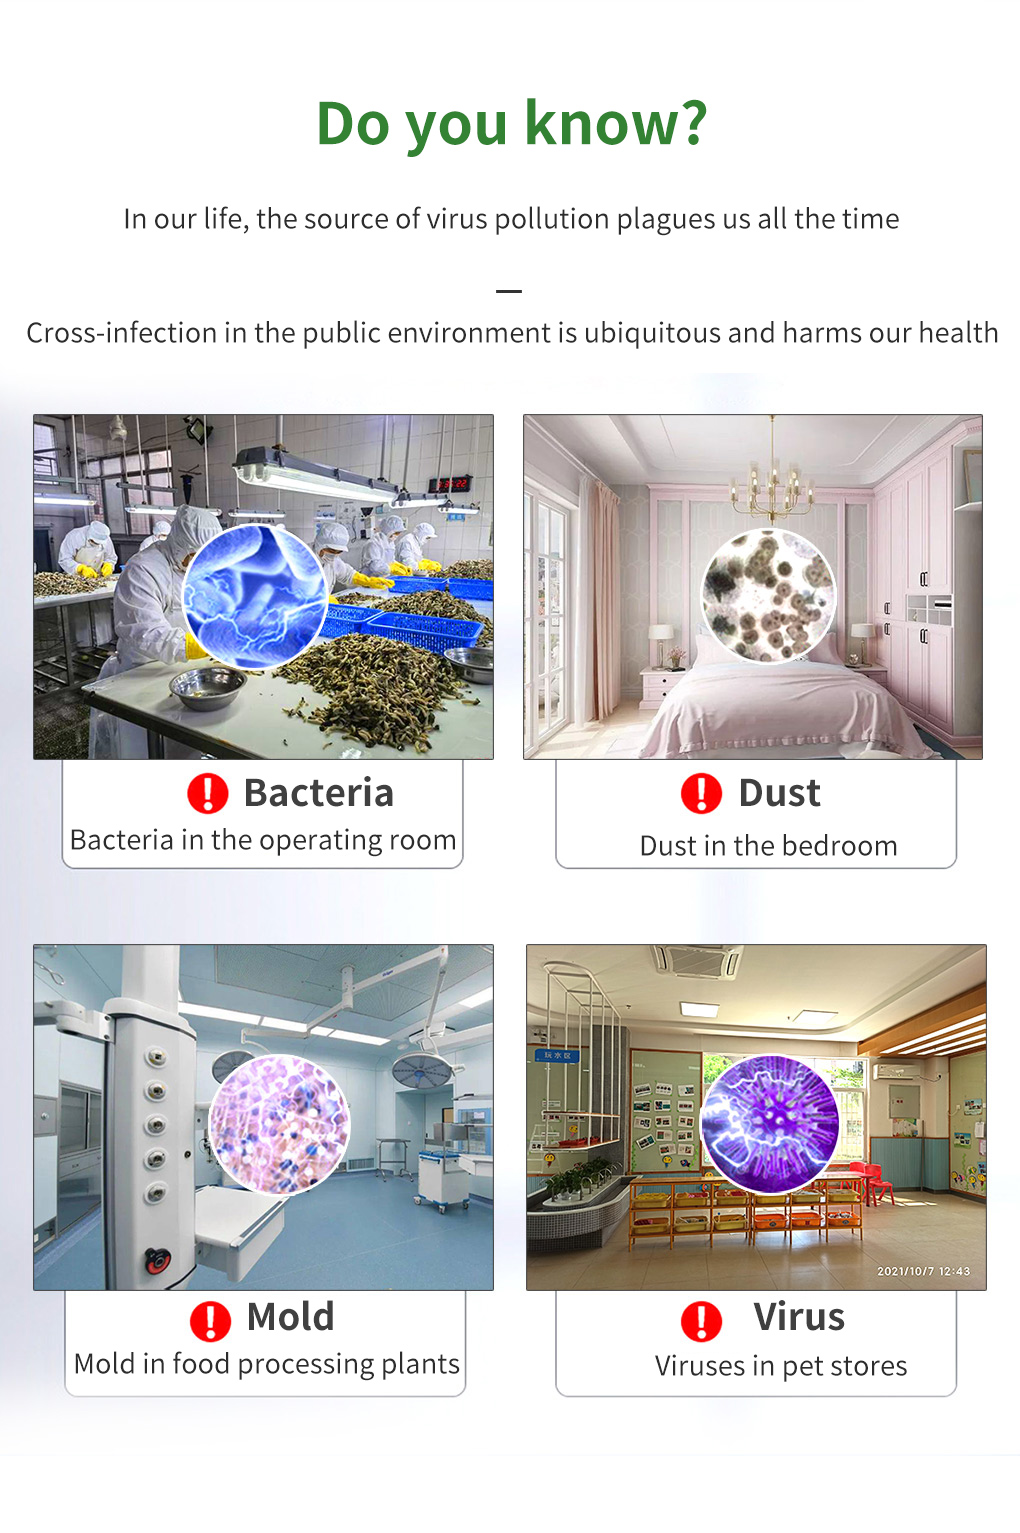 Cabinet air purification and disinfection machine